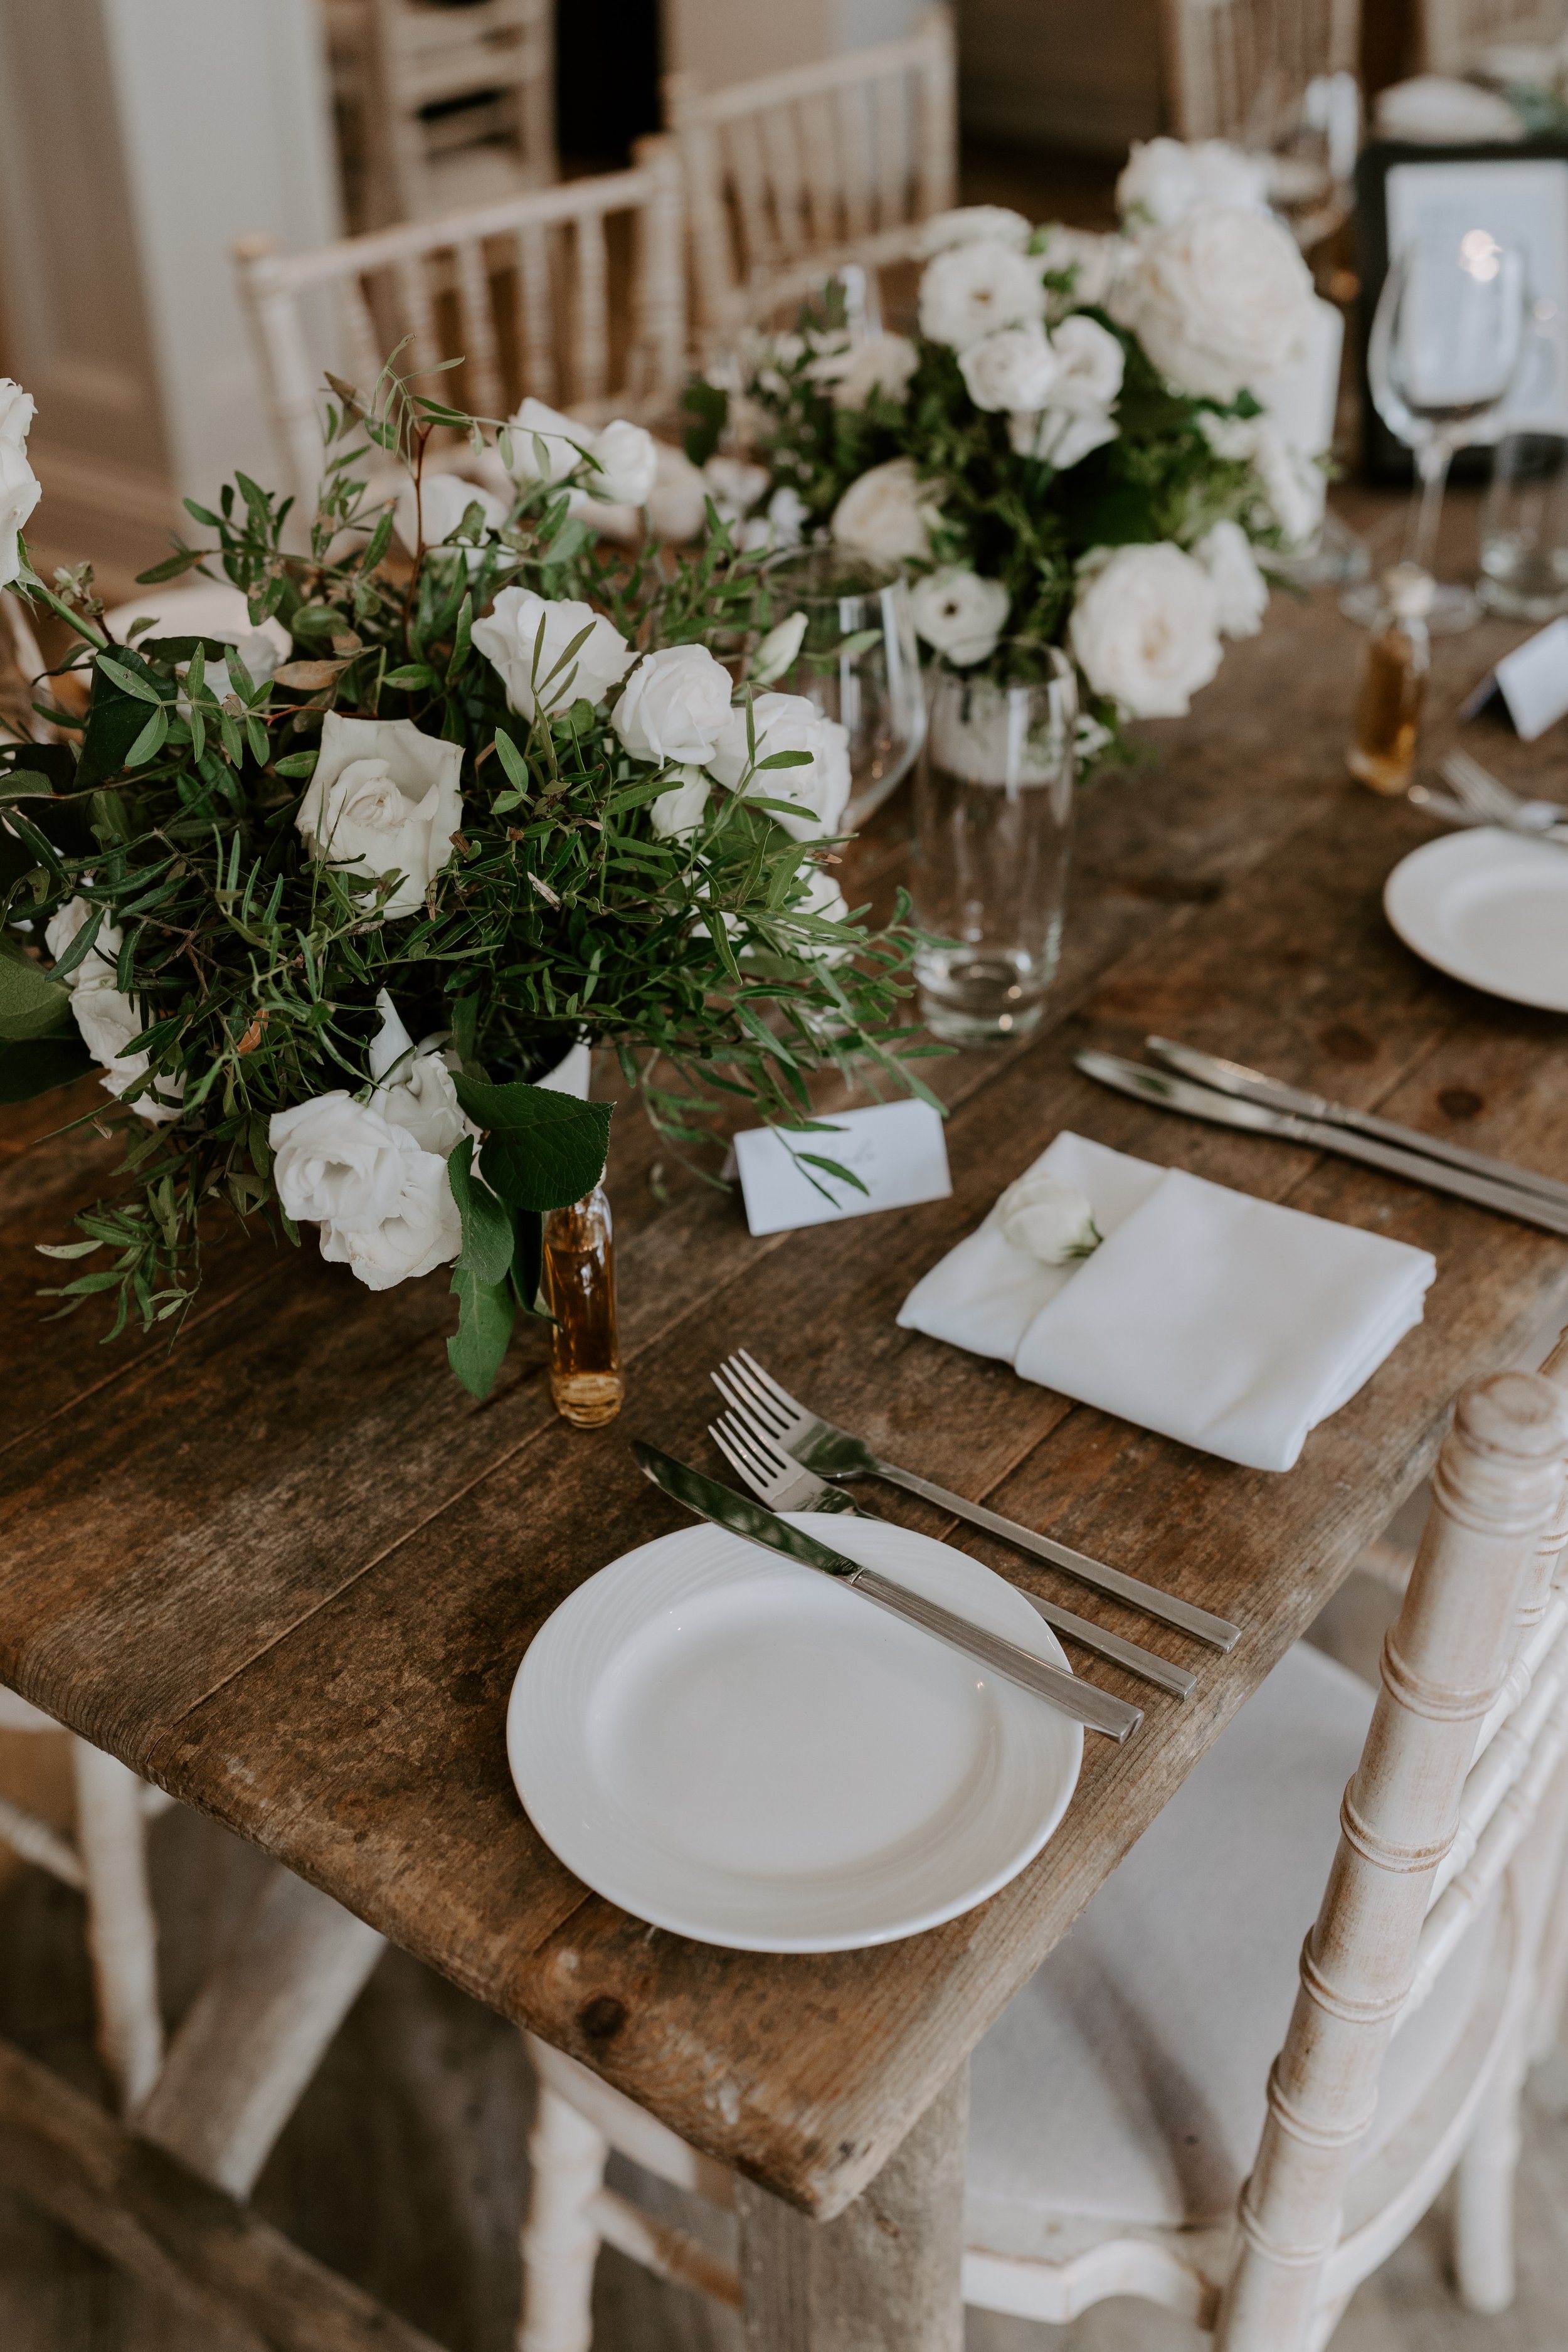  A wooden wedding breakfast table looks stylish with white crockery and modern floral arrangements down the middle made up of of white roses and green foliage.  Photo by: Marta D Photography @cmartad.weddings 